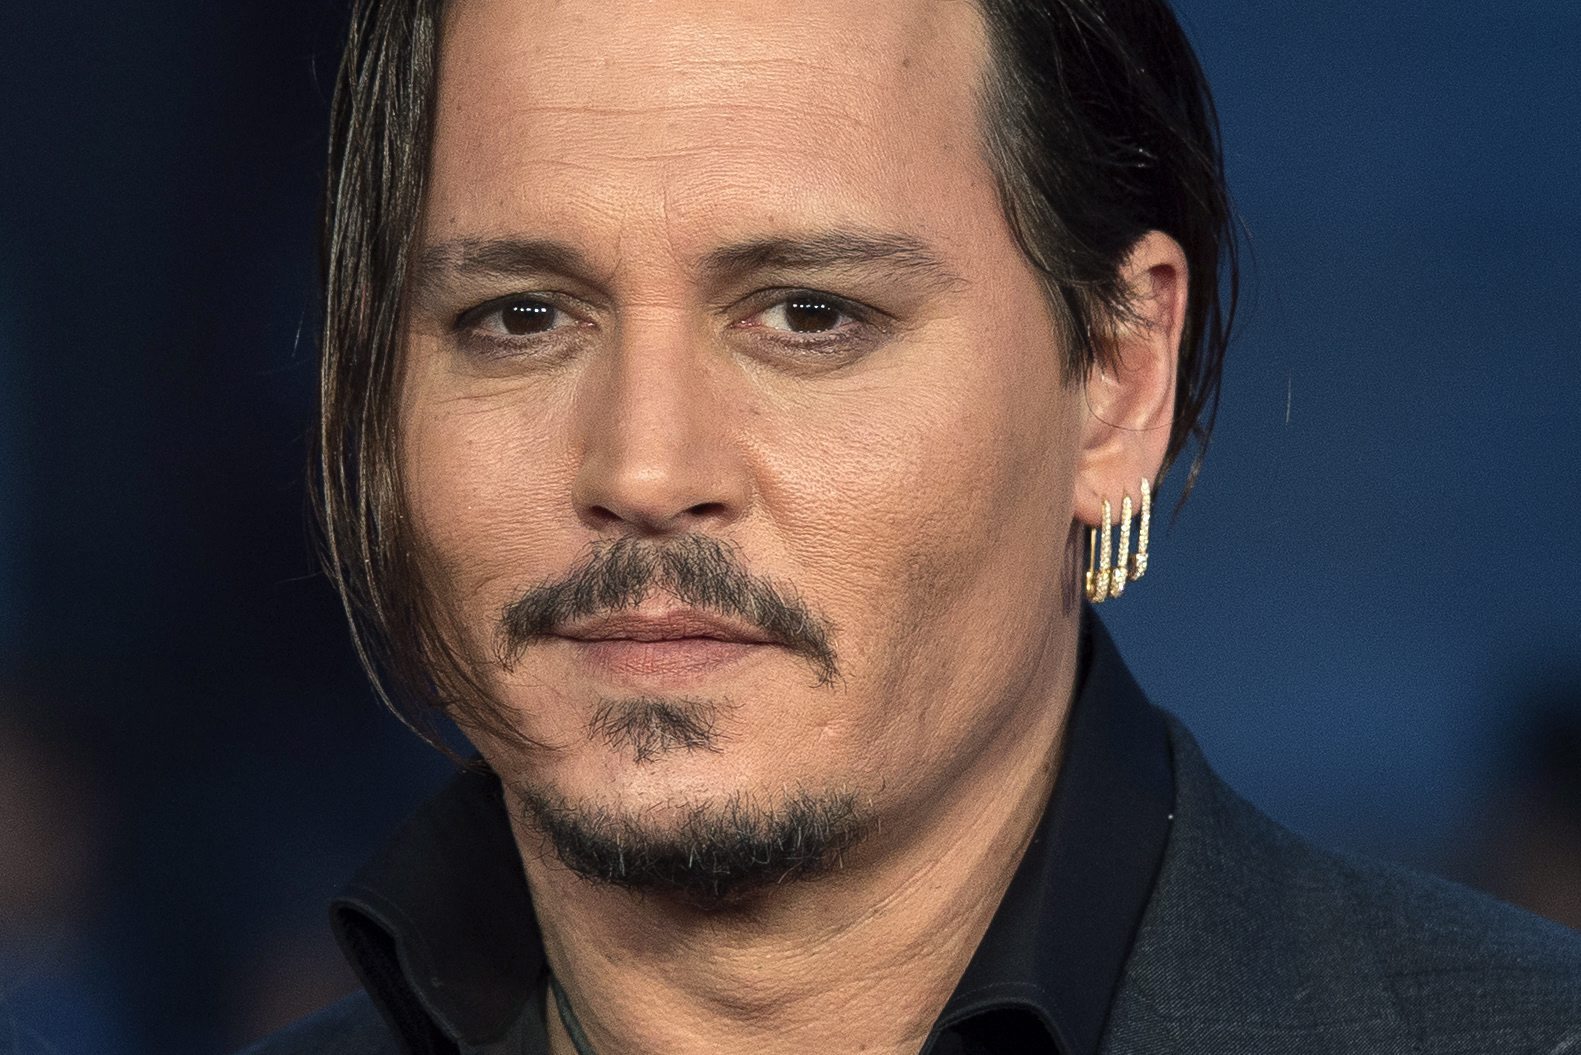 2015-10-11 18:21:52 epa04974094 US actor/cast member Johnny Depp arrives for the premiere of 'Black Mass' at the 59th BFI London Film Festival, in London, Britain, 11 October 2015. The festival runs from 07 to 18 October. EPA/WILL OLIVER